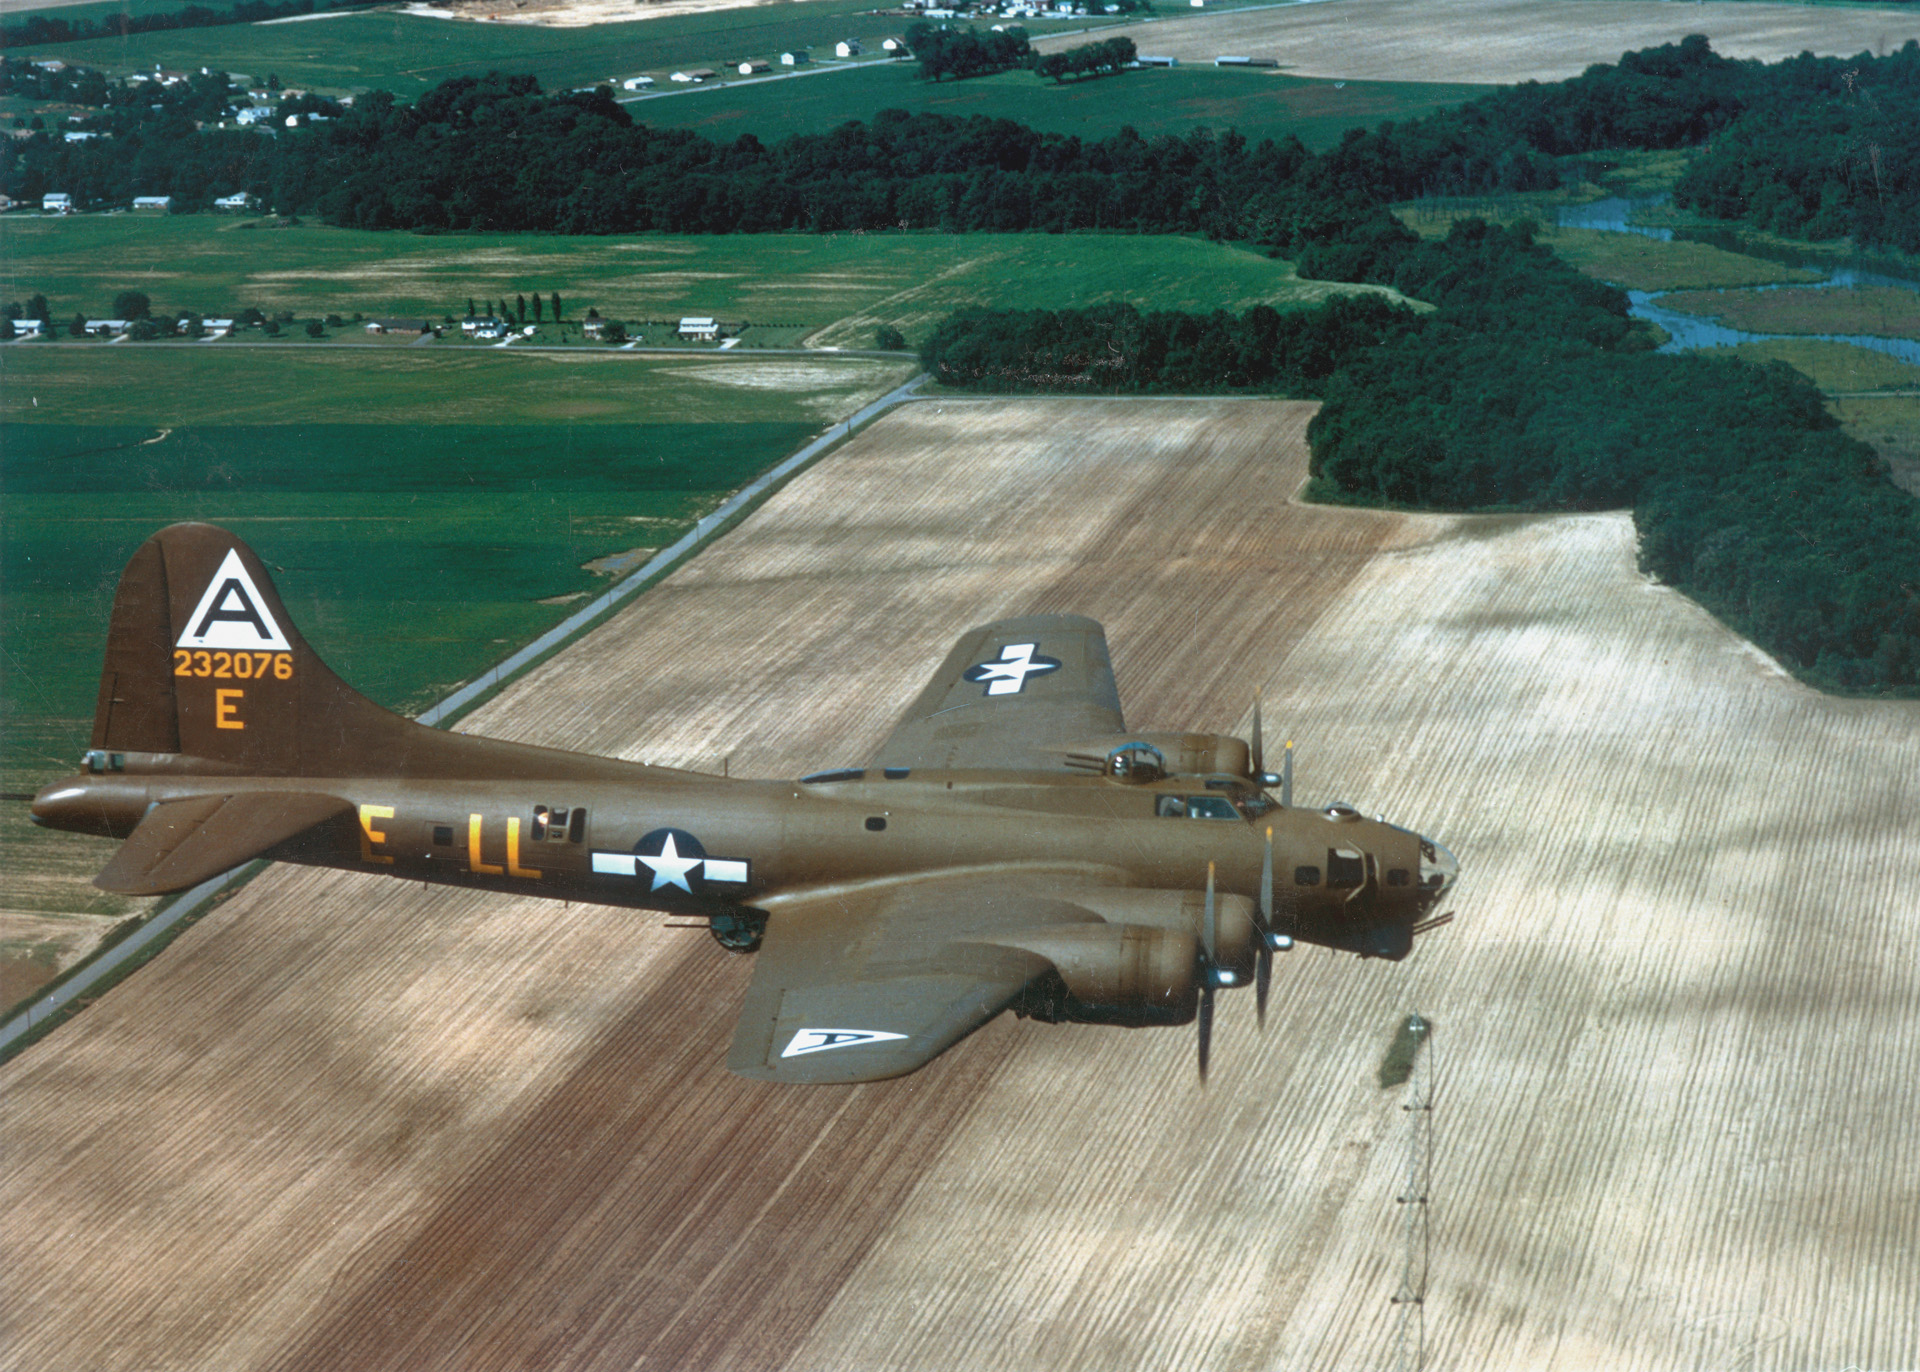 An olive-drab B-17G Flying Fortress of the 401st Bomb Squadron, 91st Bomb Group, flies over the English countryside on its way to hit targets in Germany. Later in the war, the bombers were left unpainted to save weight. The Eighth U.S. Air Force lost over 10,500 planes and 47,000 personnel killed and wounded in combat during the war. 